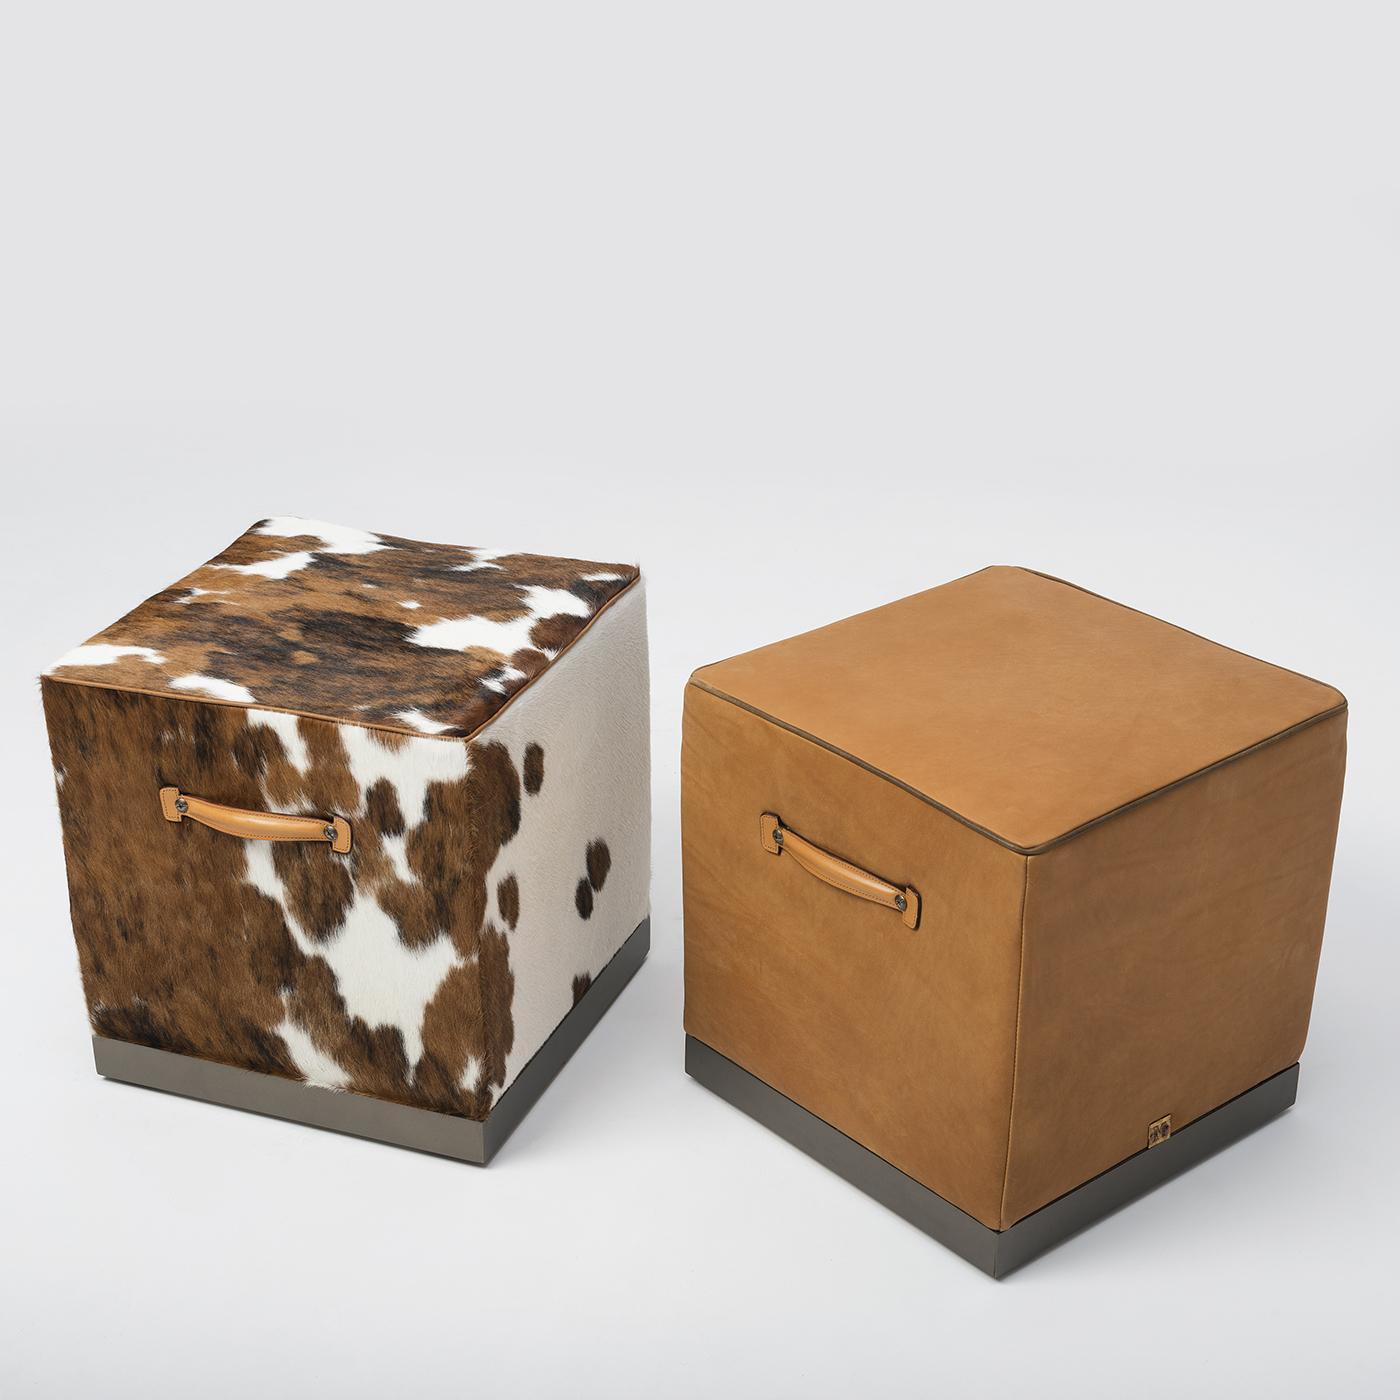 The Fedro Pouf adds a playful touch to any living space. Its cubic silhouette exudes a simple elegance, supported by a robust internal structure. Finished with swivel wheels inserted into the base and leather handles on the sides for maximum